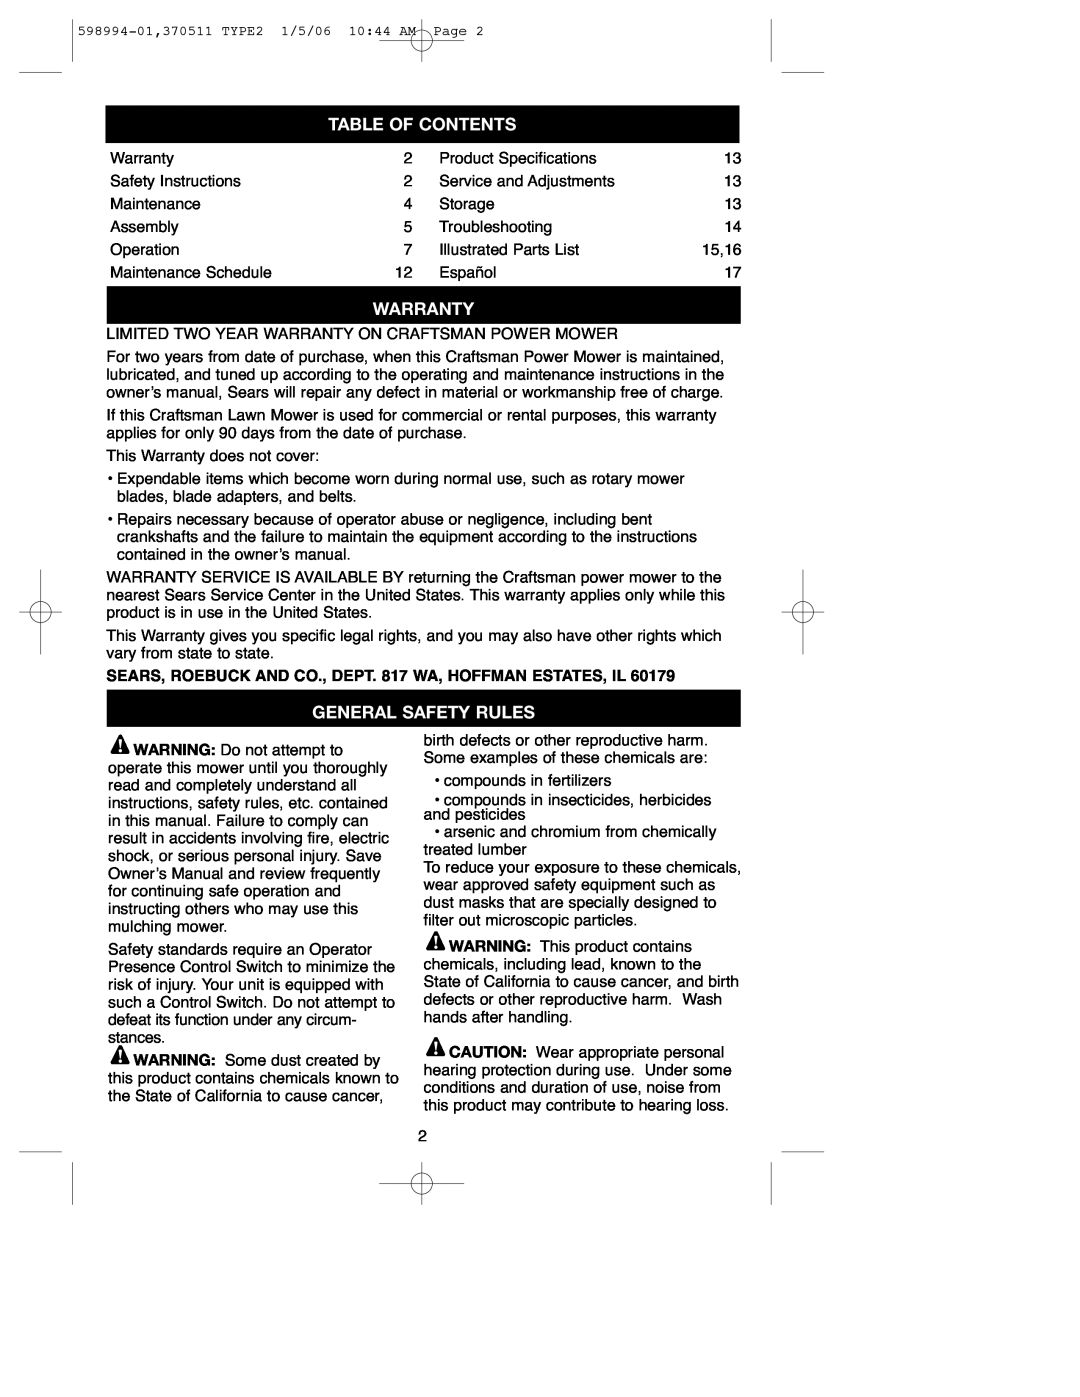 DeWalt 900.370511 instruction manual Table Of Contents, Warranty, General Safety Rules 